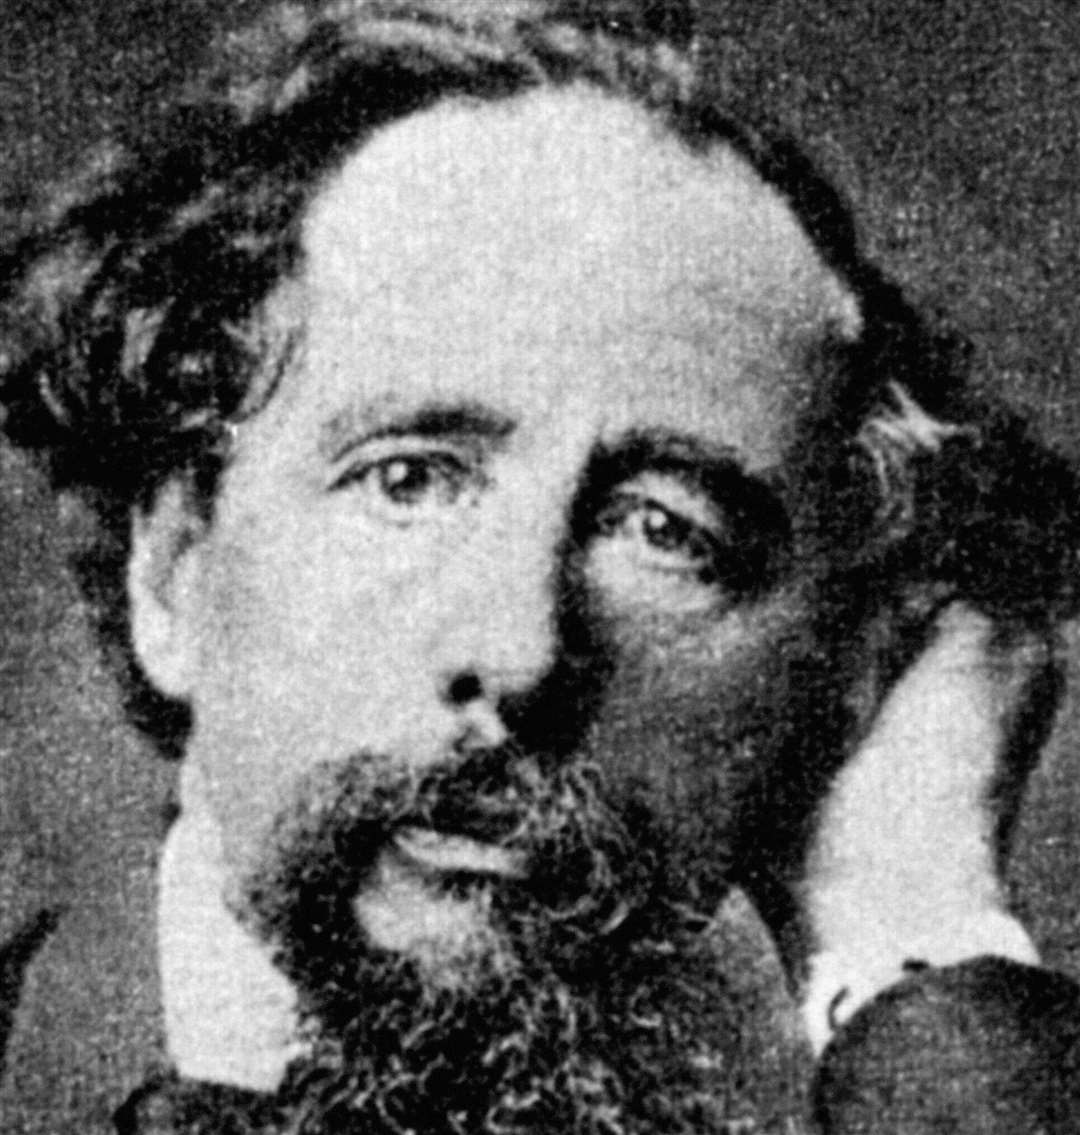 The author is one of the most celebrated British writers in history. Picture: Charles Dickens Museum